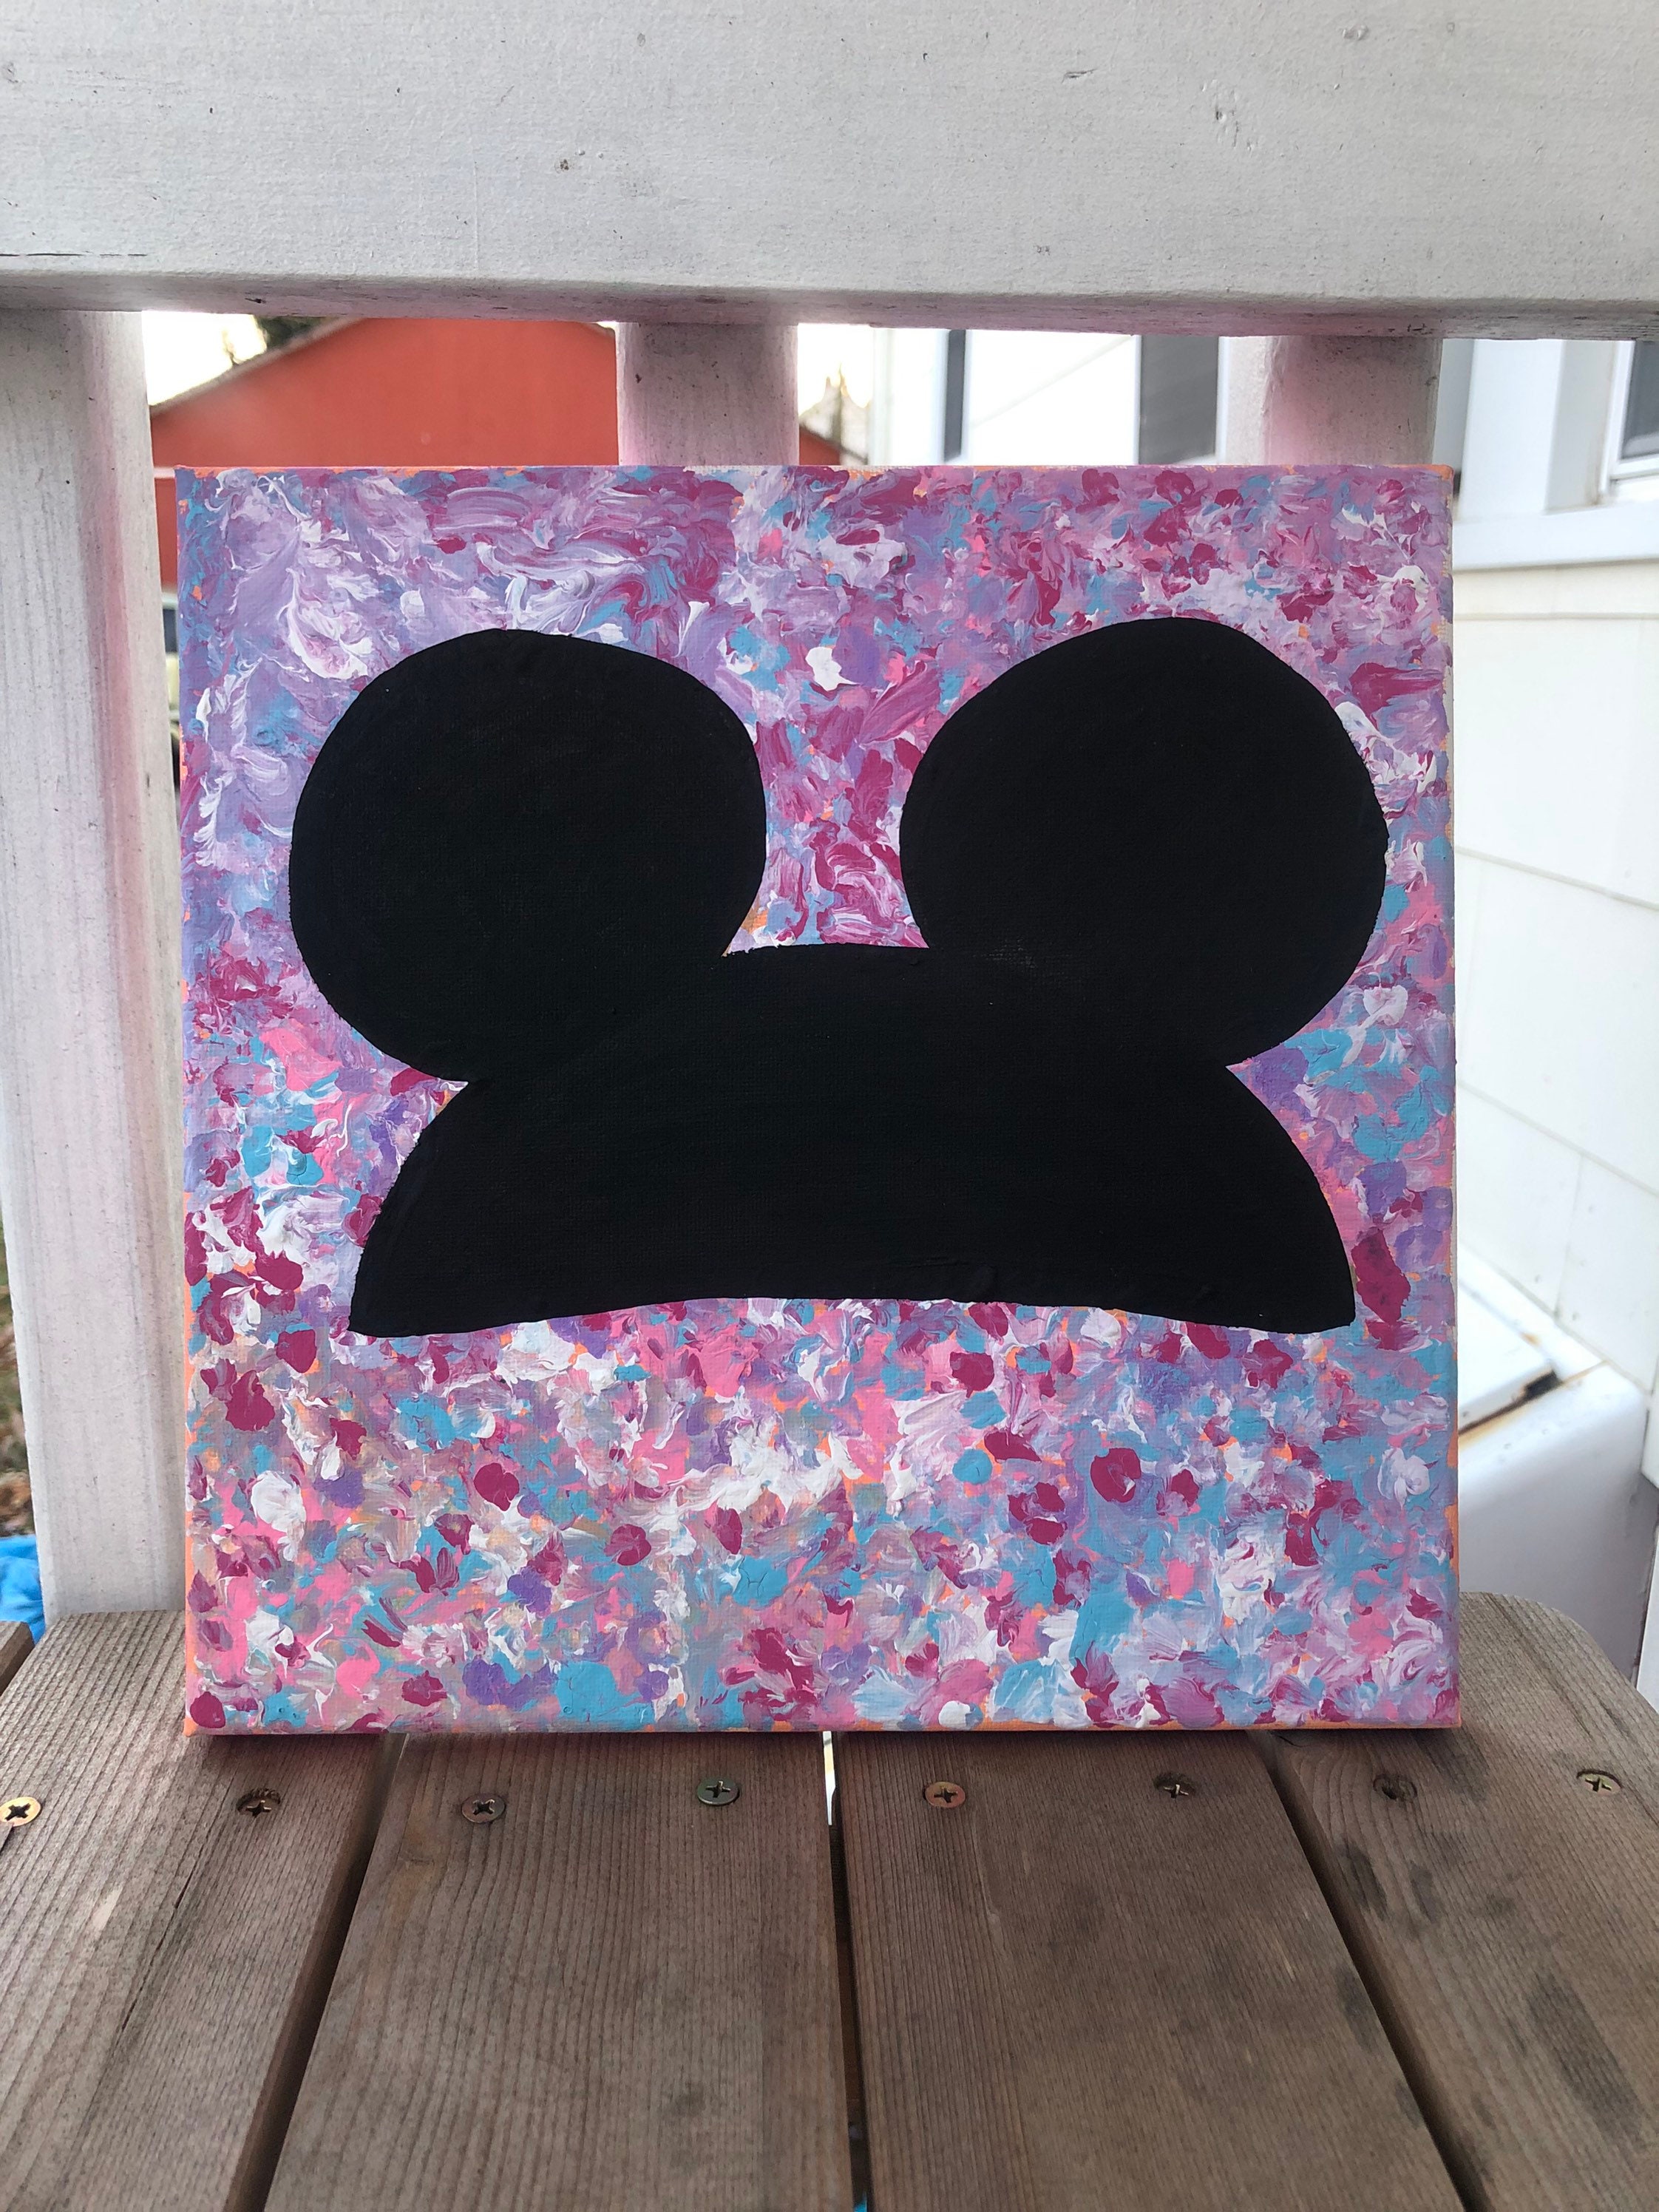 DISNEY Inspired Painting MICKEY EARS With Abstract Backround - Etsy ...